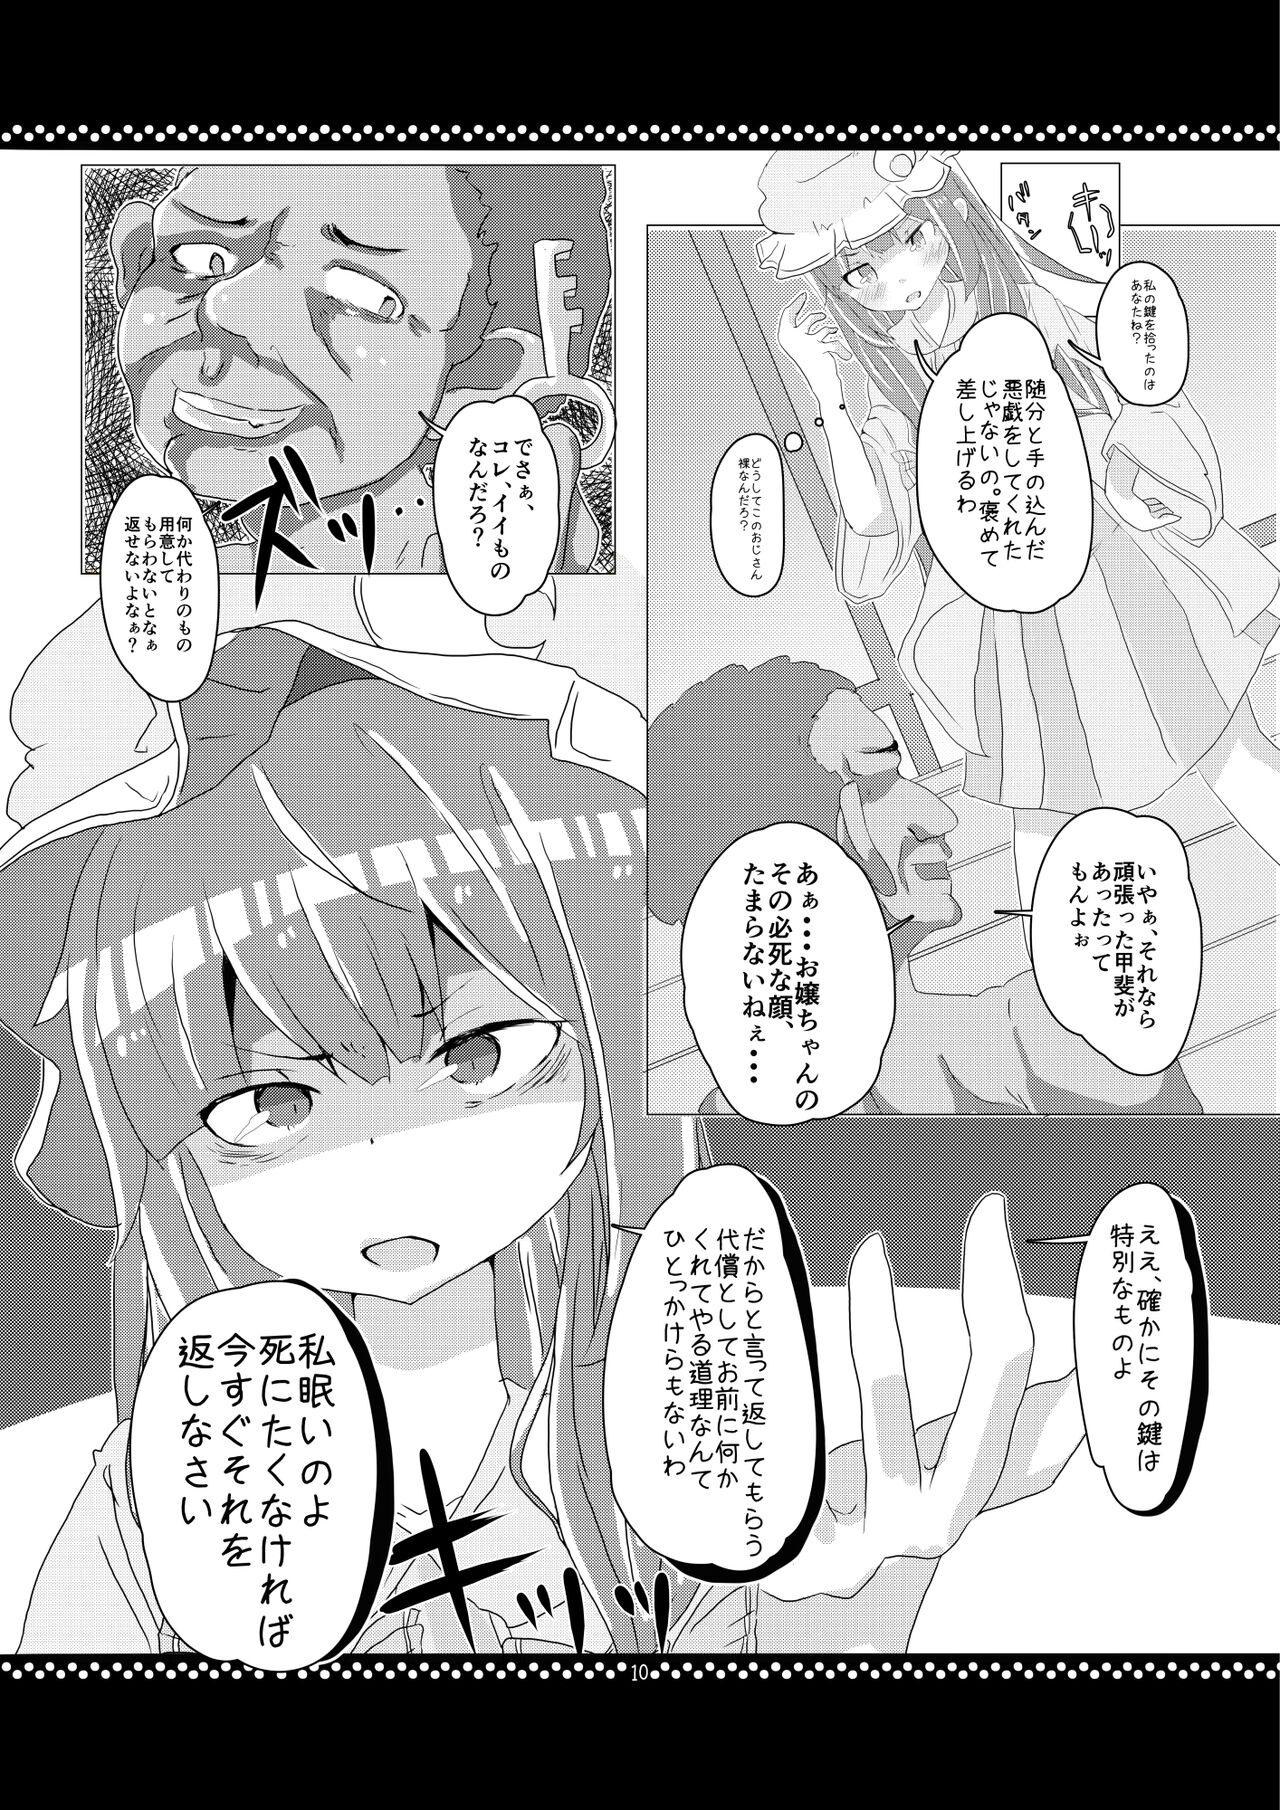 Pendeja 従順？パチュリーさま！ - Touhou project Twinks - Page 9